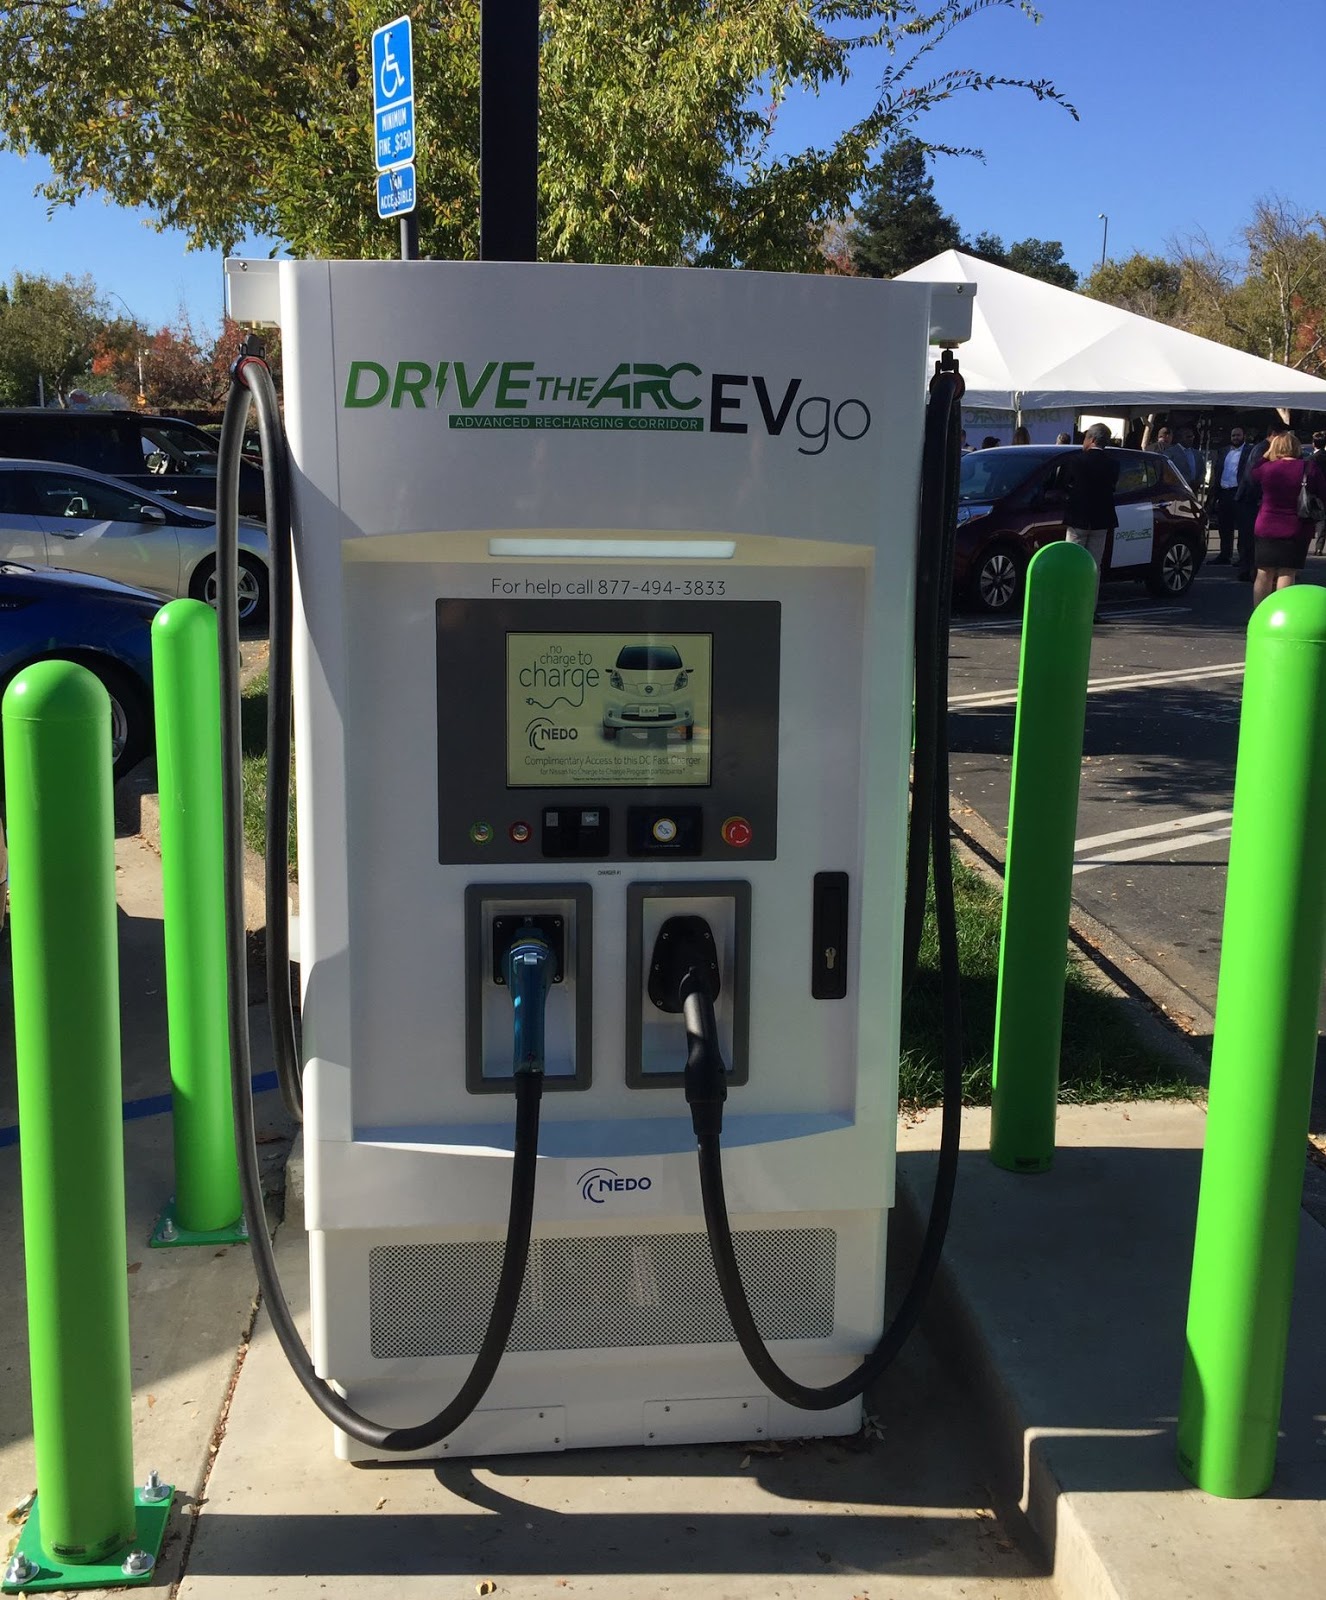 Groundbreaking Ceremony Celebrating Fast Charging Corridor for Electric